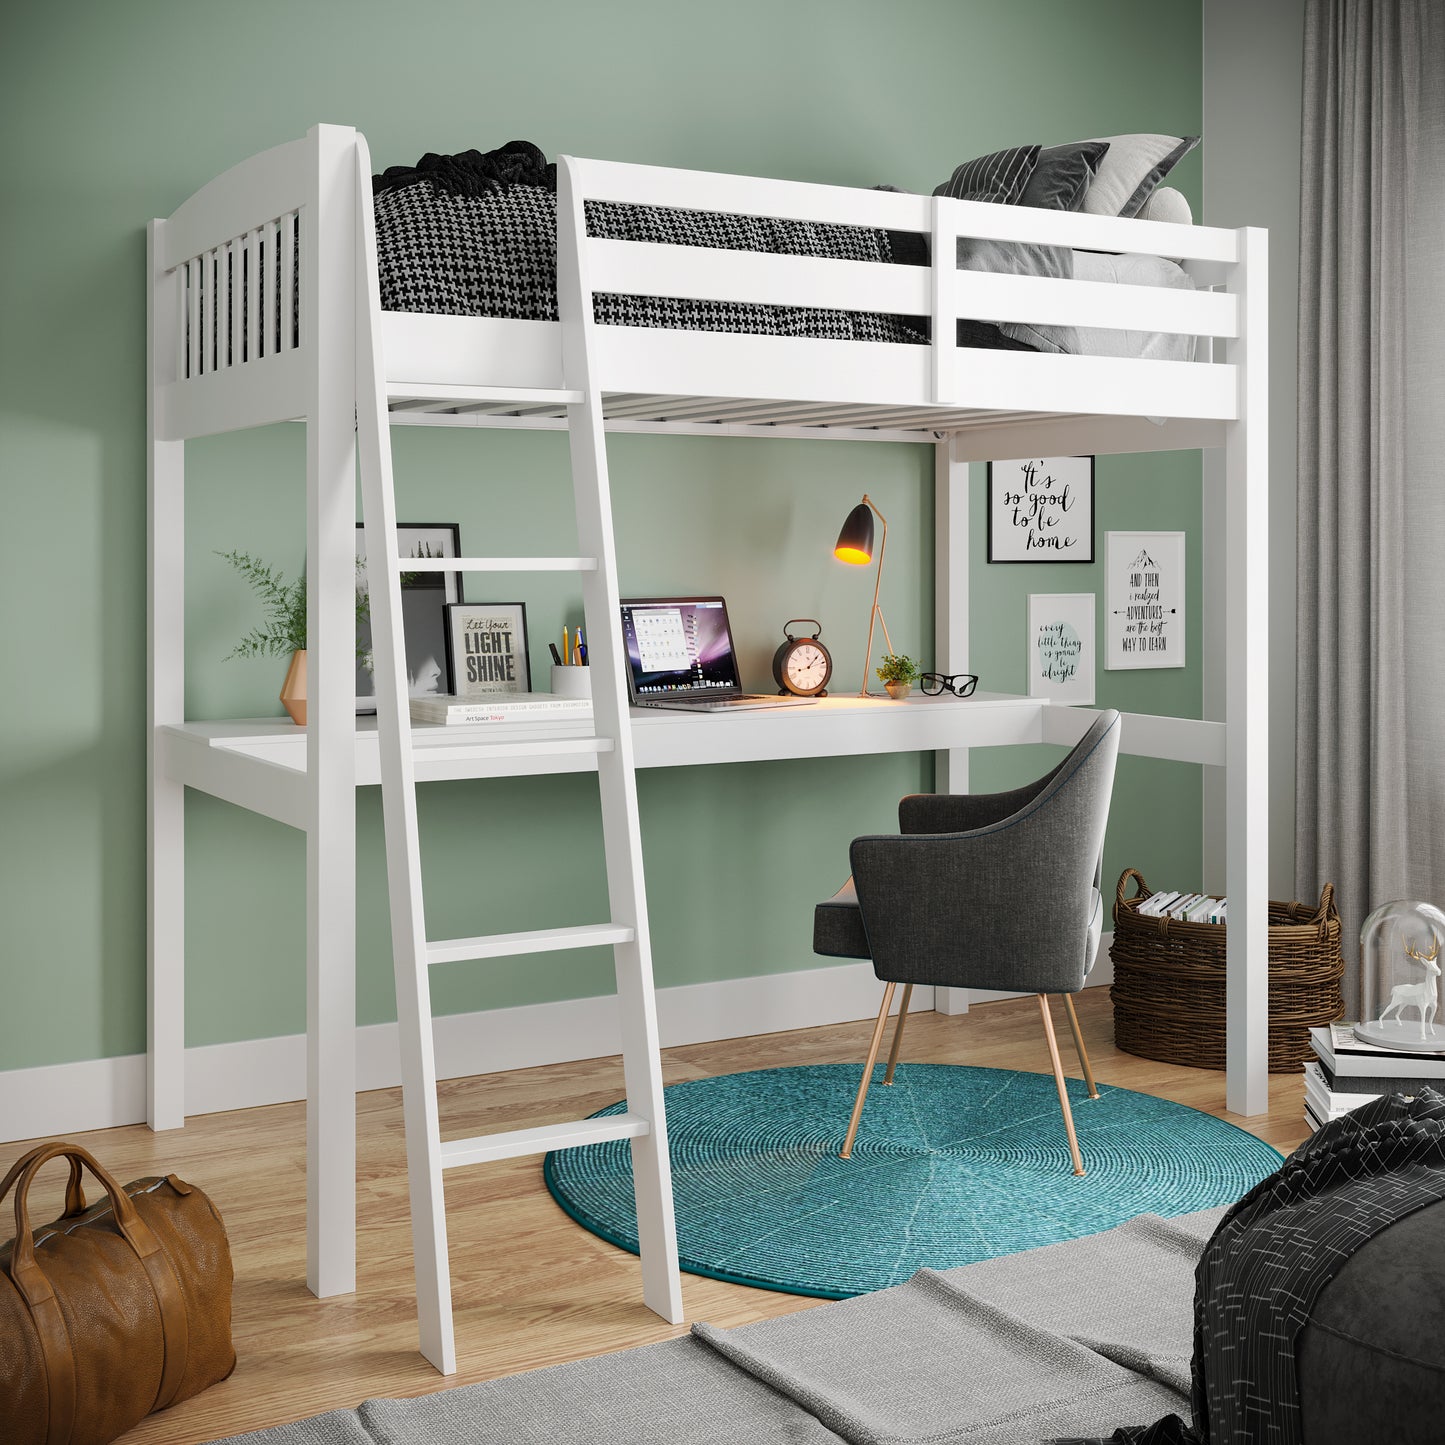 Yes4Wood Everest White High Loft Bed with Desk and Storage, Space Saver Full Size Kids Loft Bed with Stairs for Toddlers Assembled in Sturdy Solid Wood, No Box Spring Needed